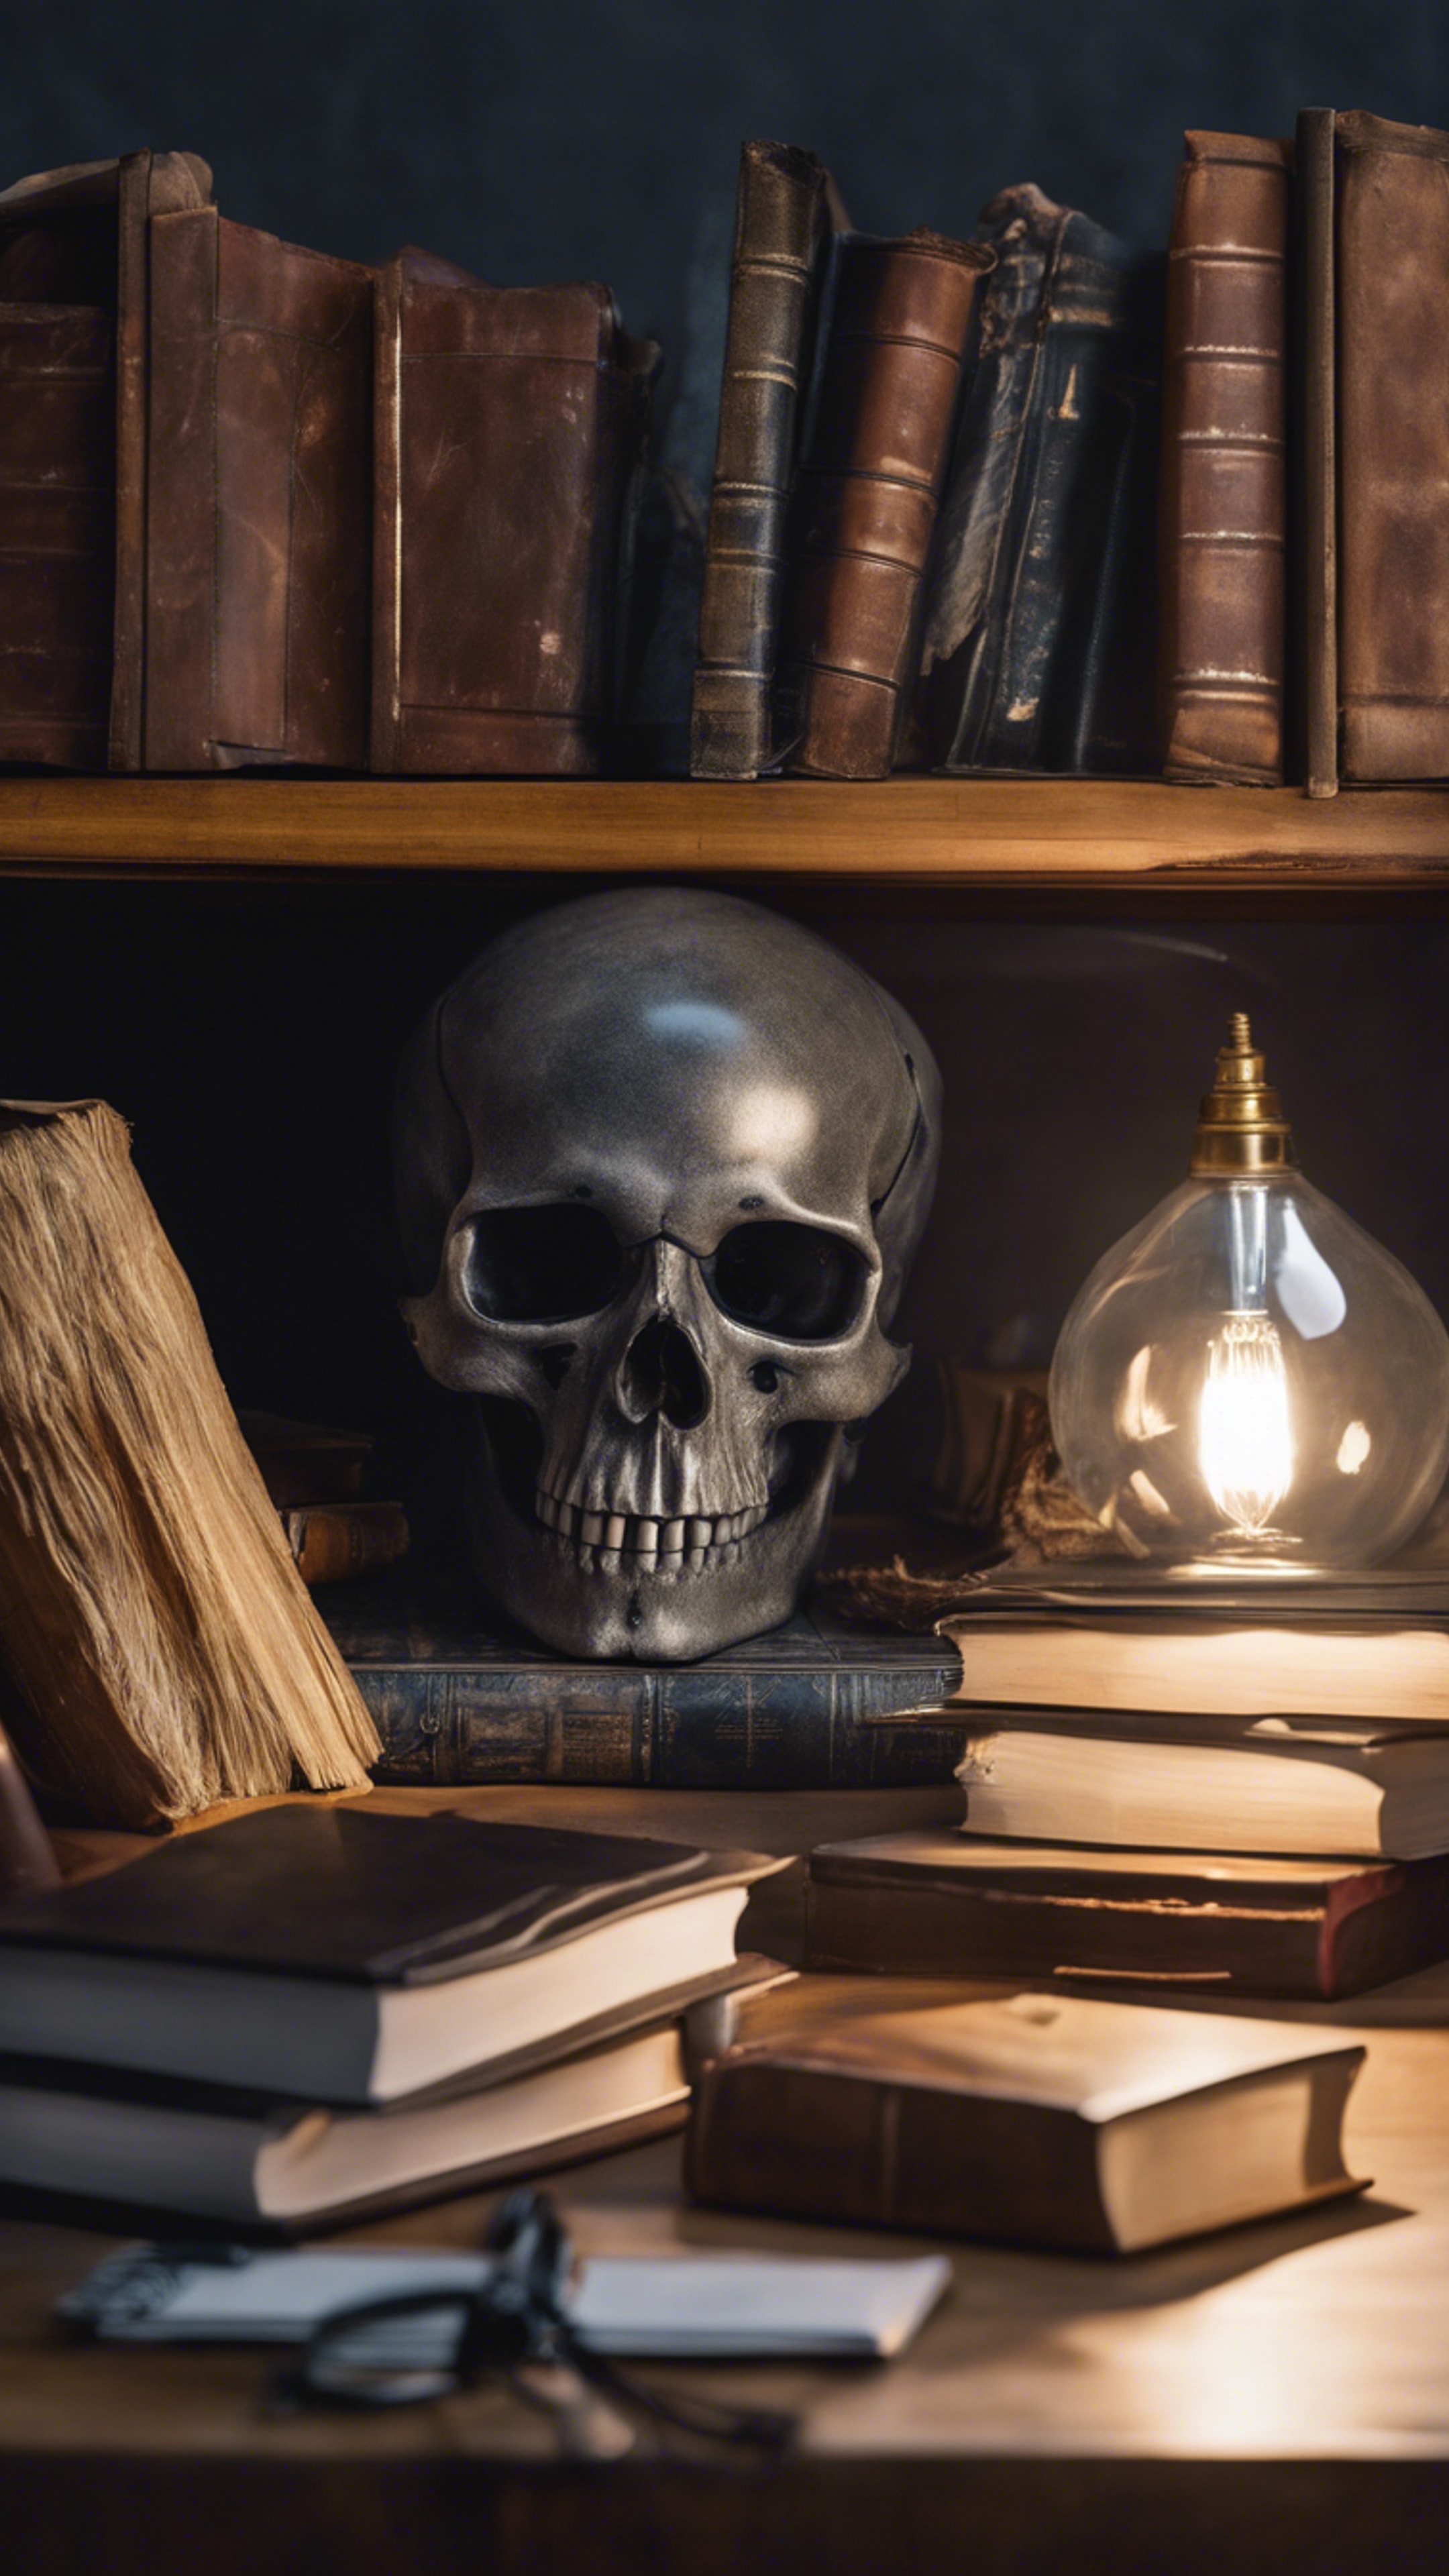 A study desk with a gray skull paperweight, surrounded by scattered books and a dimly lit lamp. Валлпапер[9ada7a5adc764debb4f2]